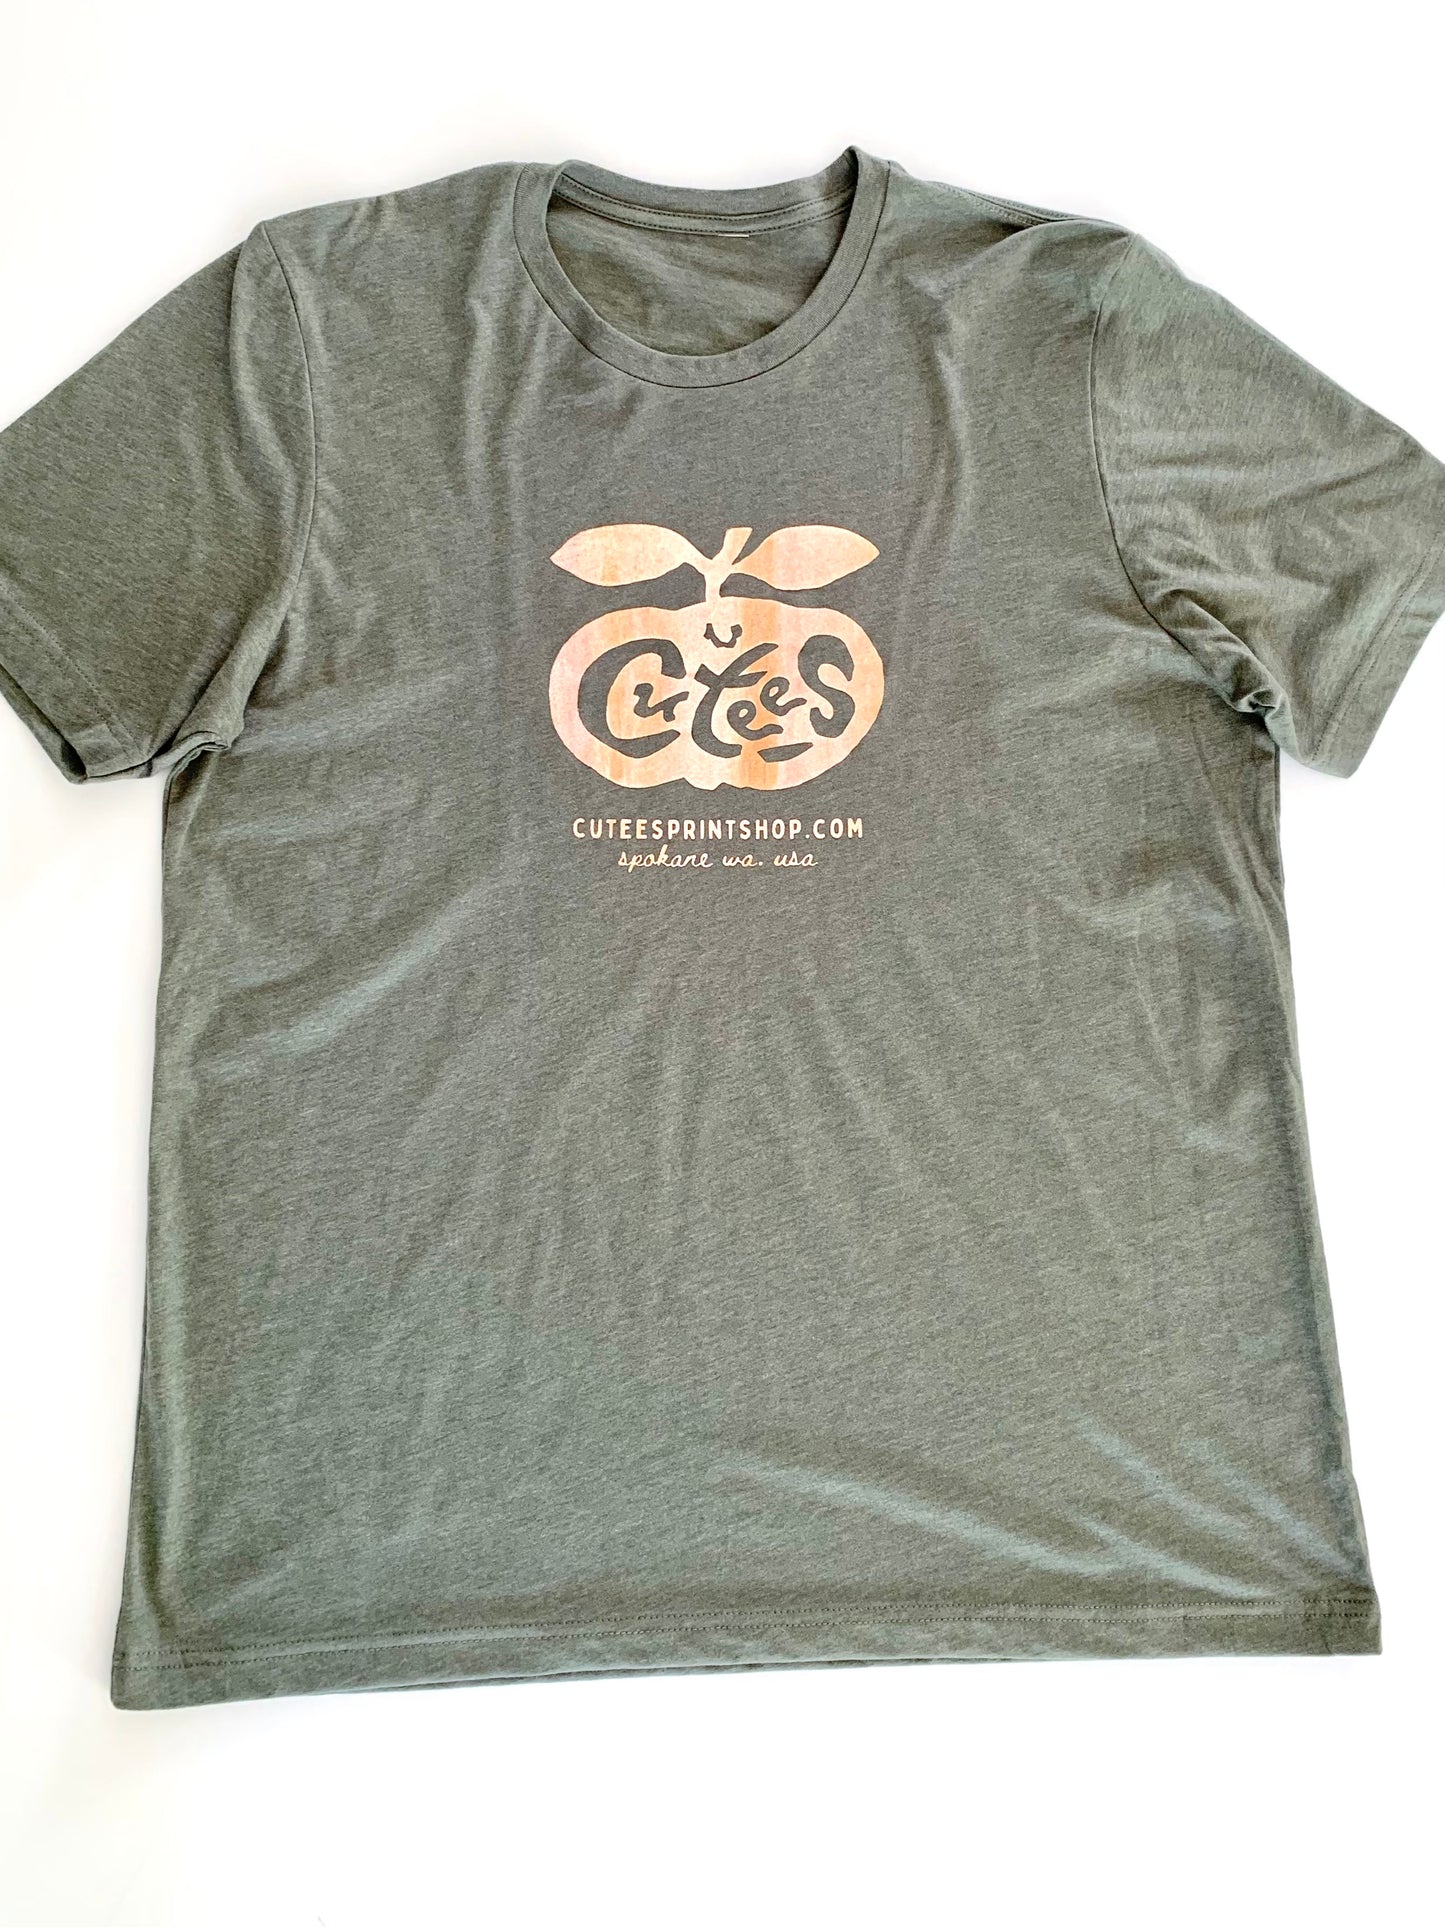 Cutees Original Logo Tee in Olive Heather, Every-body Fit